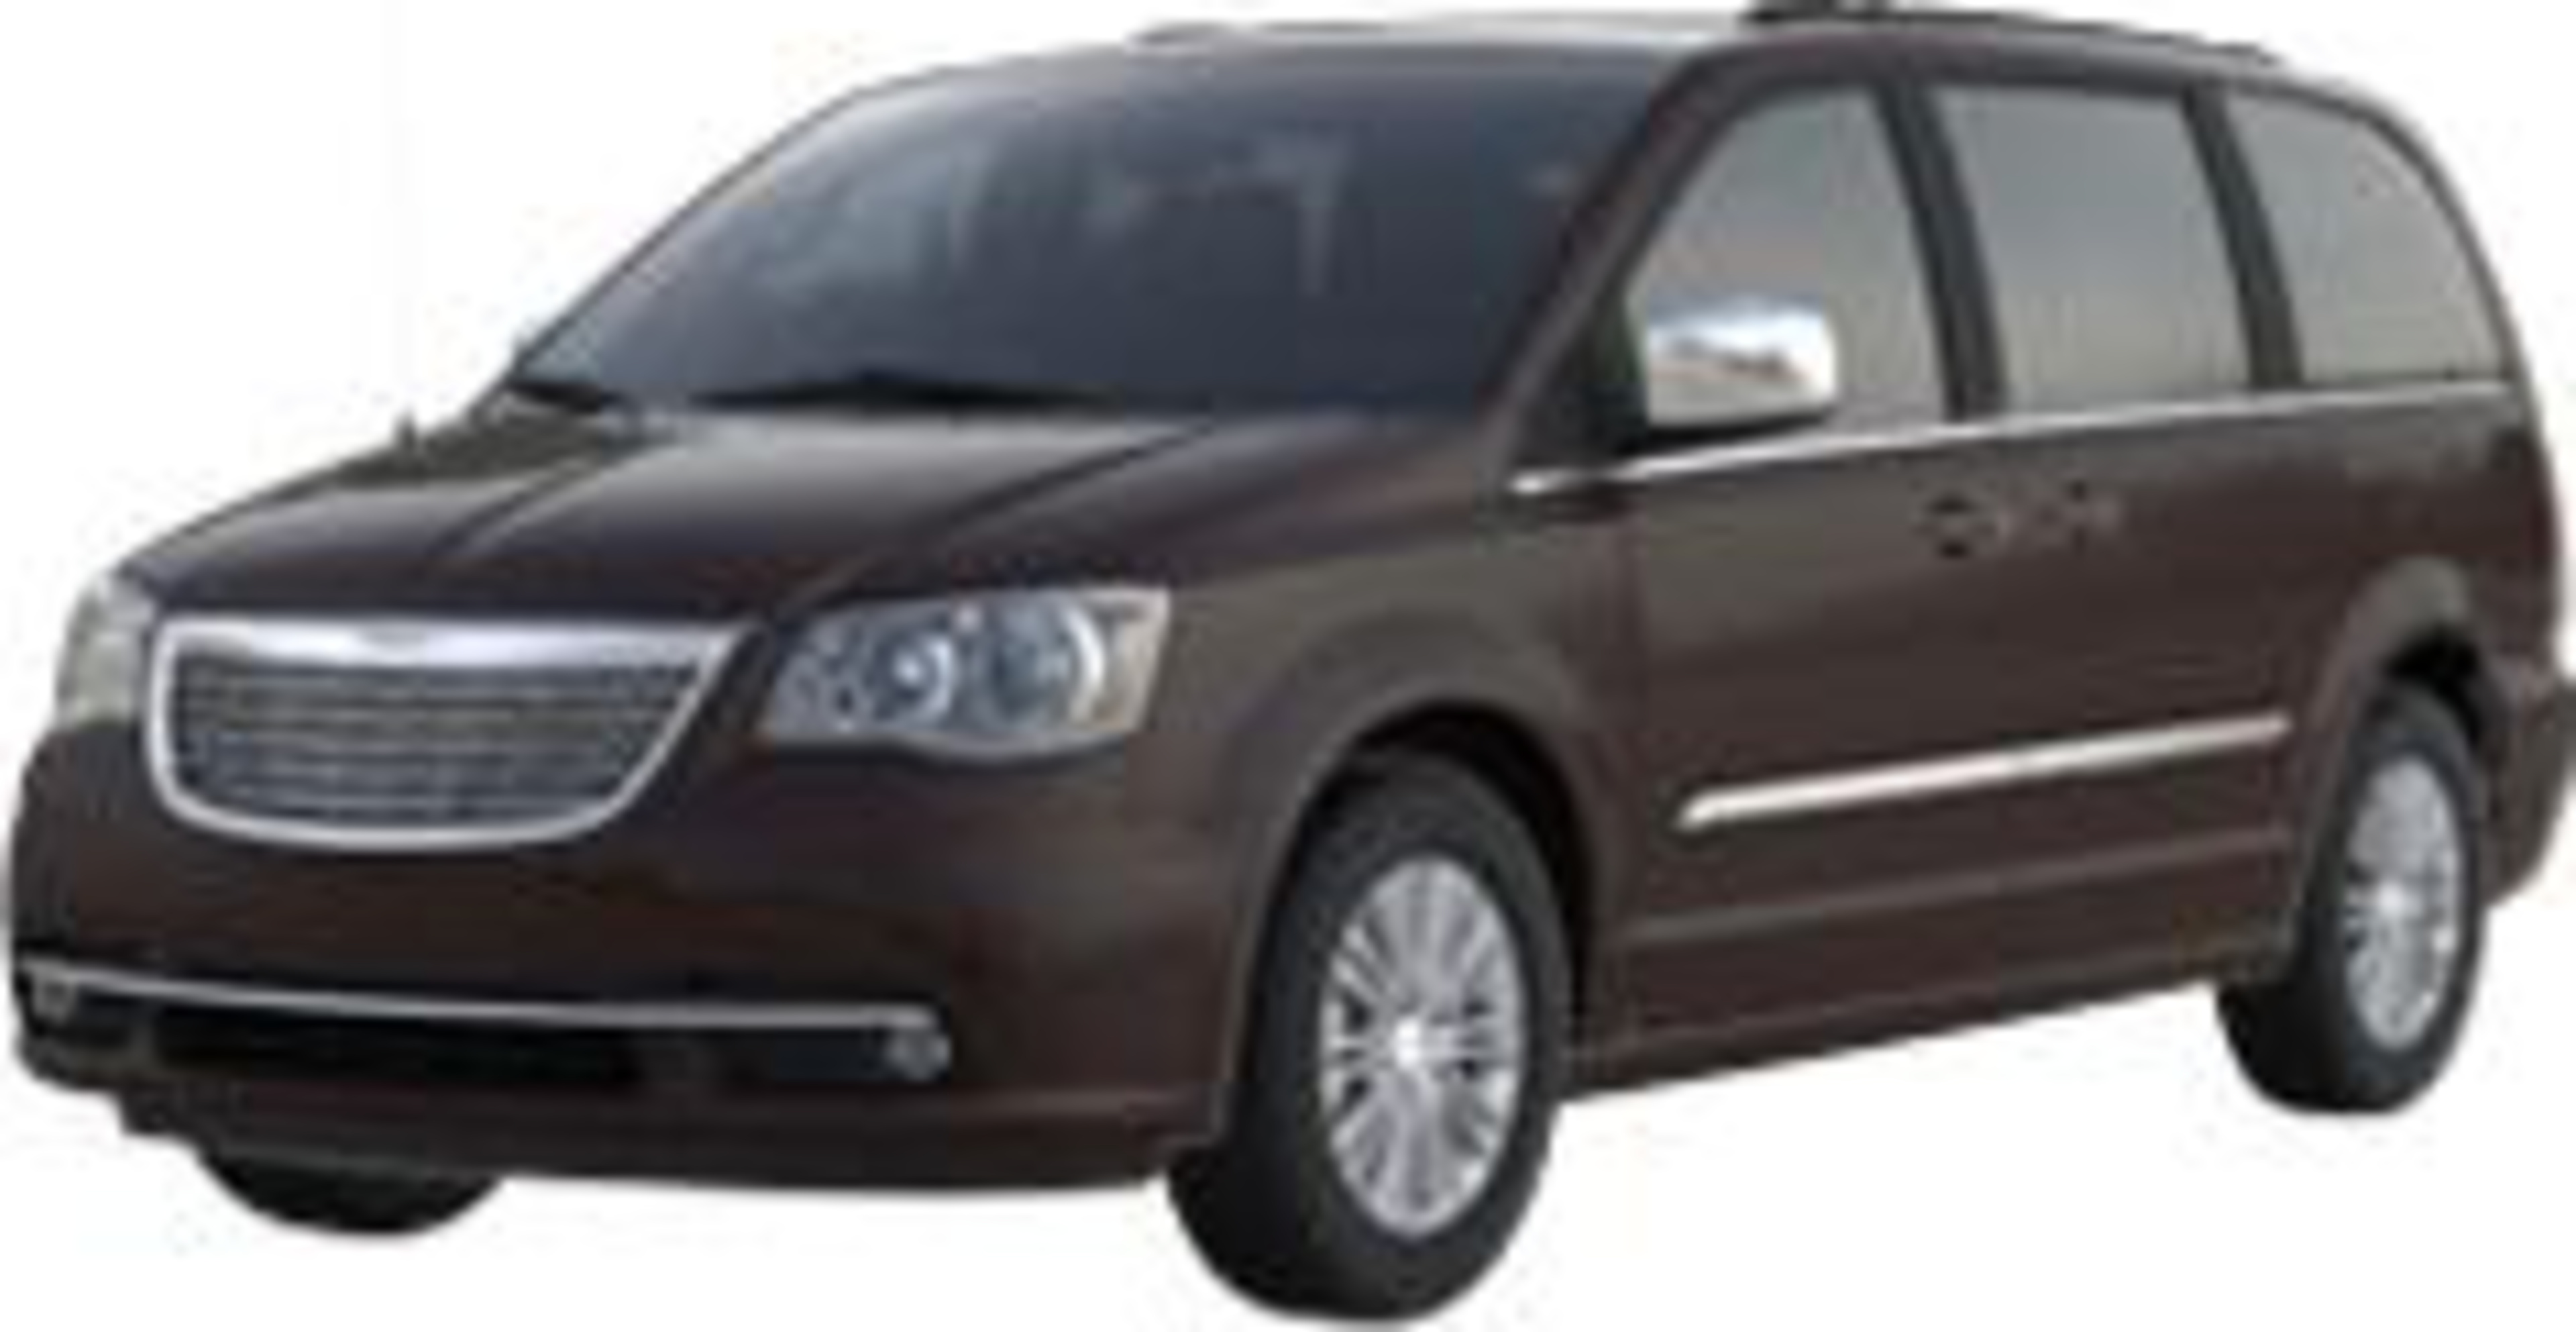 2015 Chrysler Town & Country Service and Repair Manual